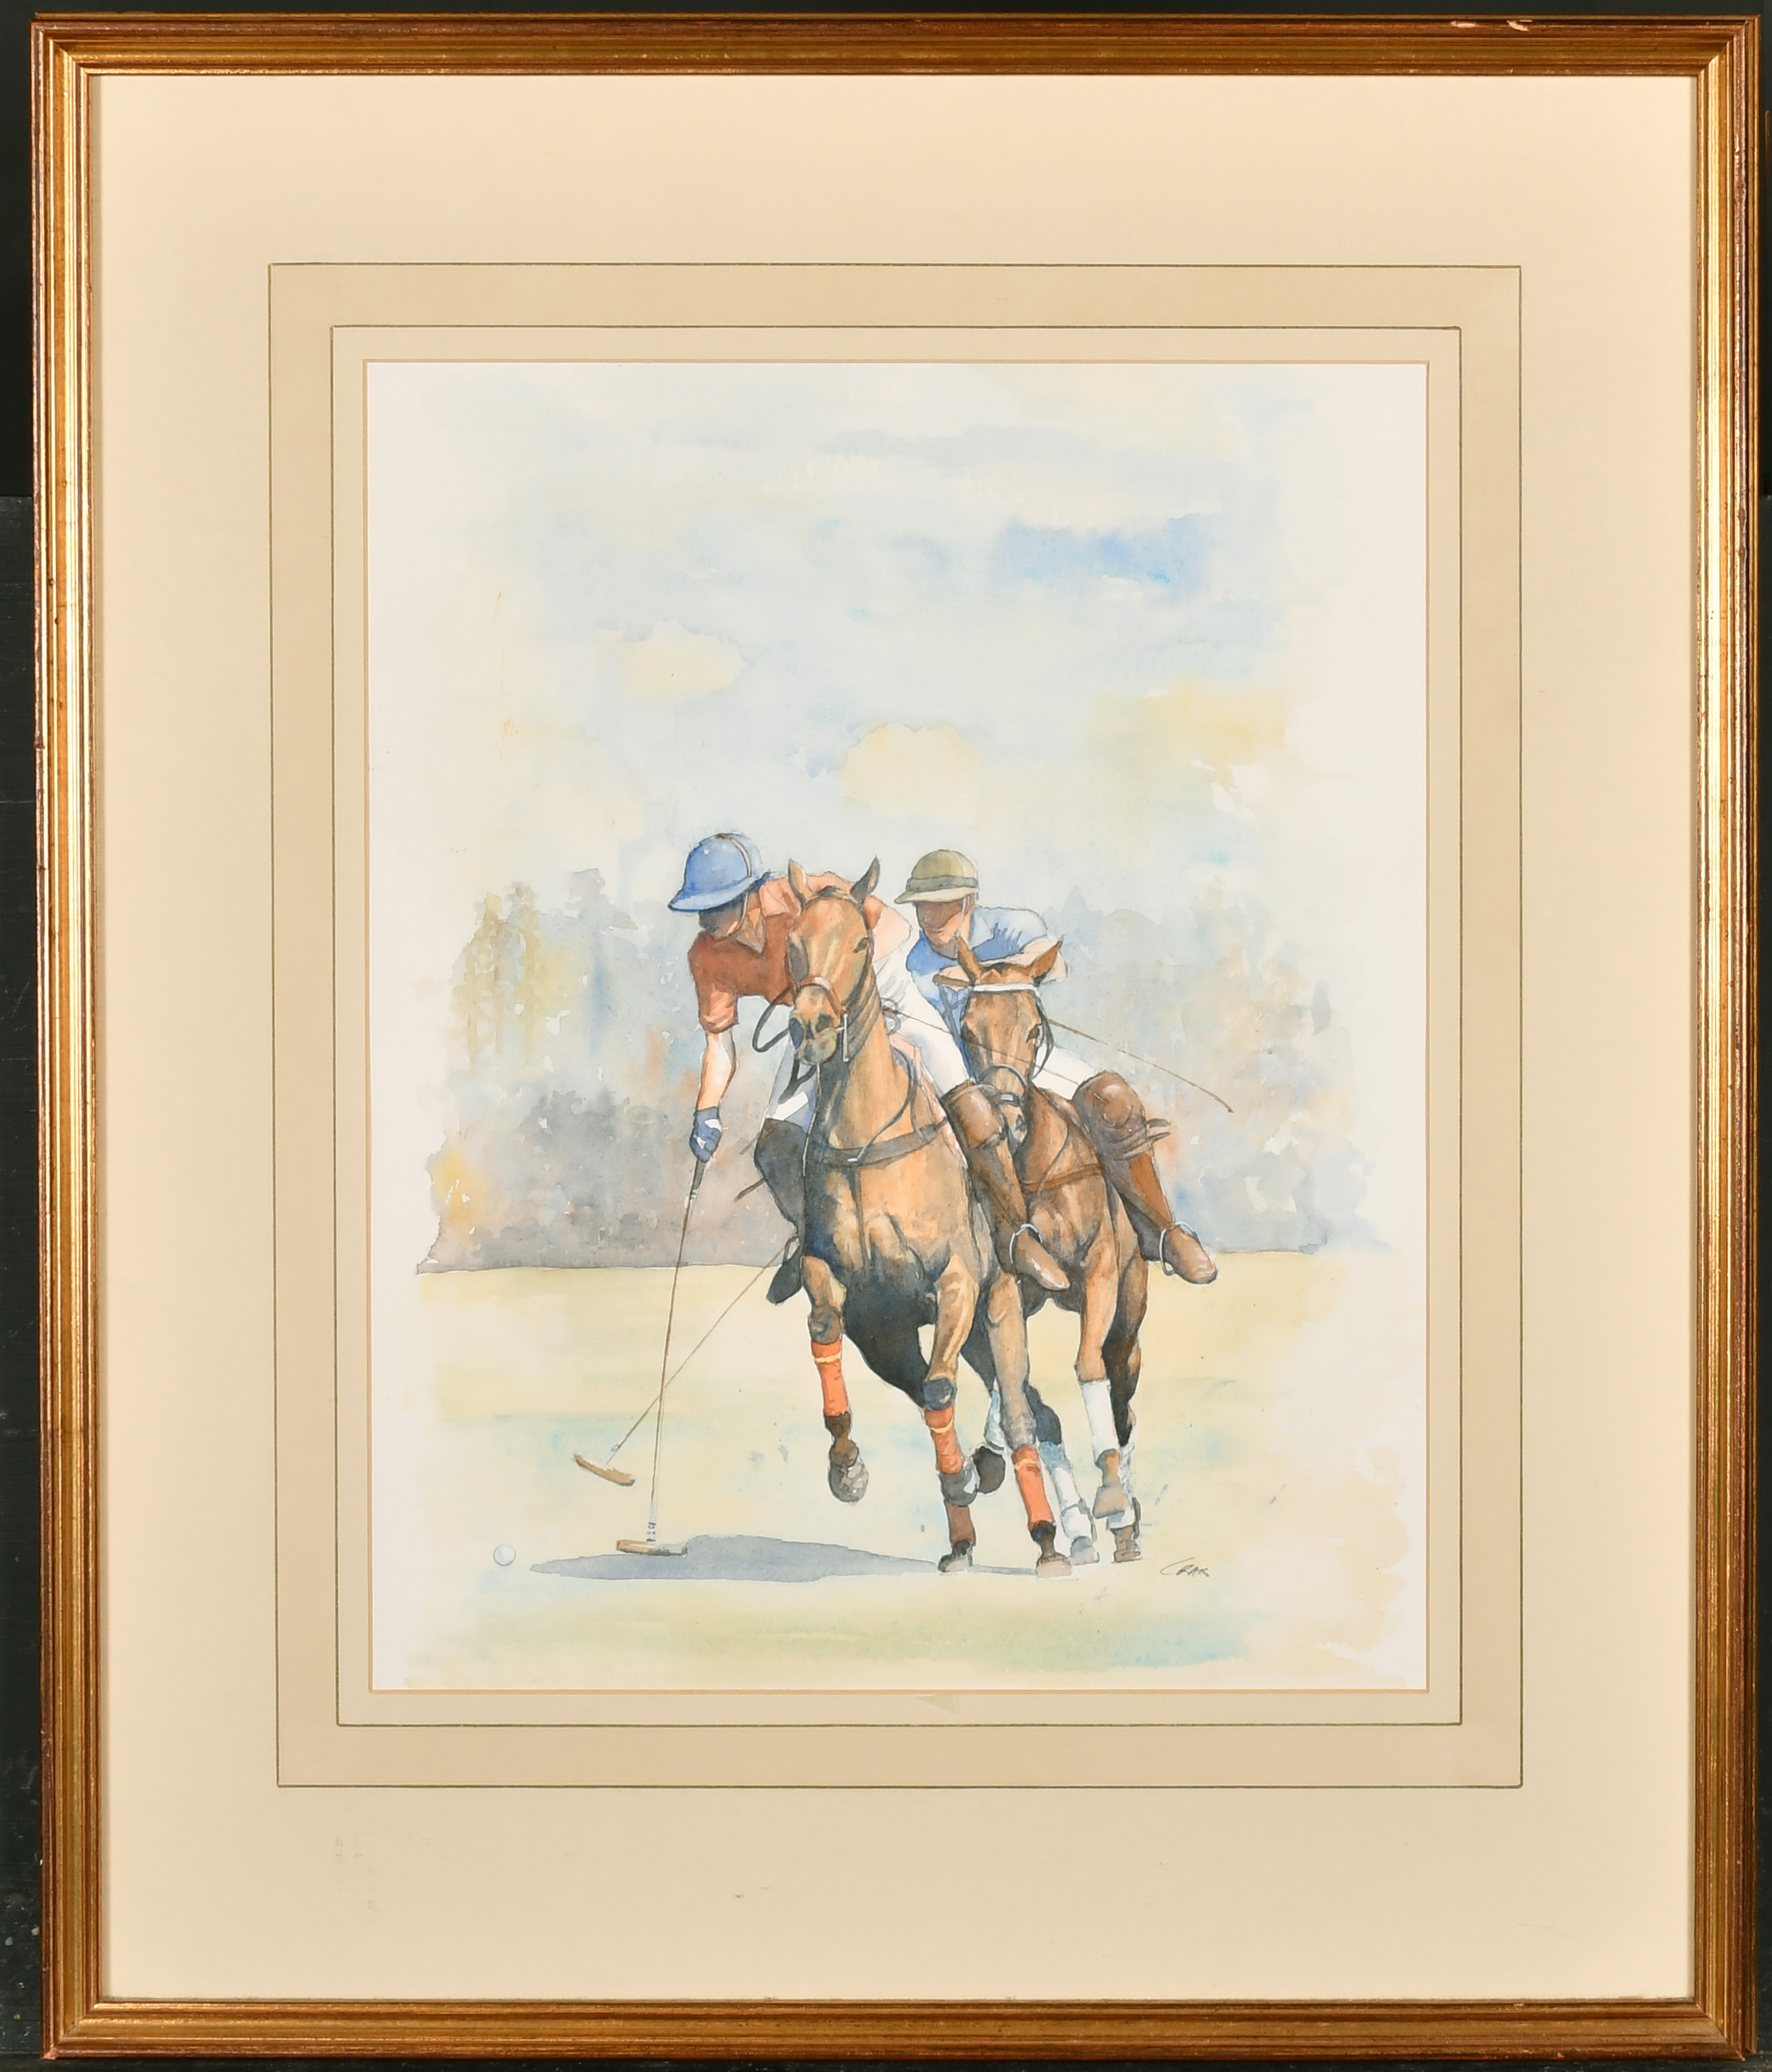 Crak (20th Century) European. Figures Playing Polo, Watercolour, Signed, 16" x 13" (40.6 x 33cm) - Image 2 of 4